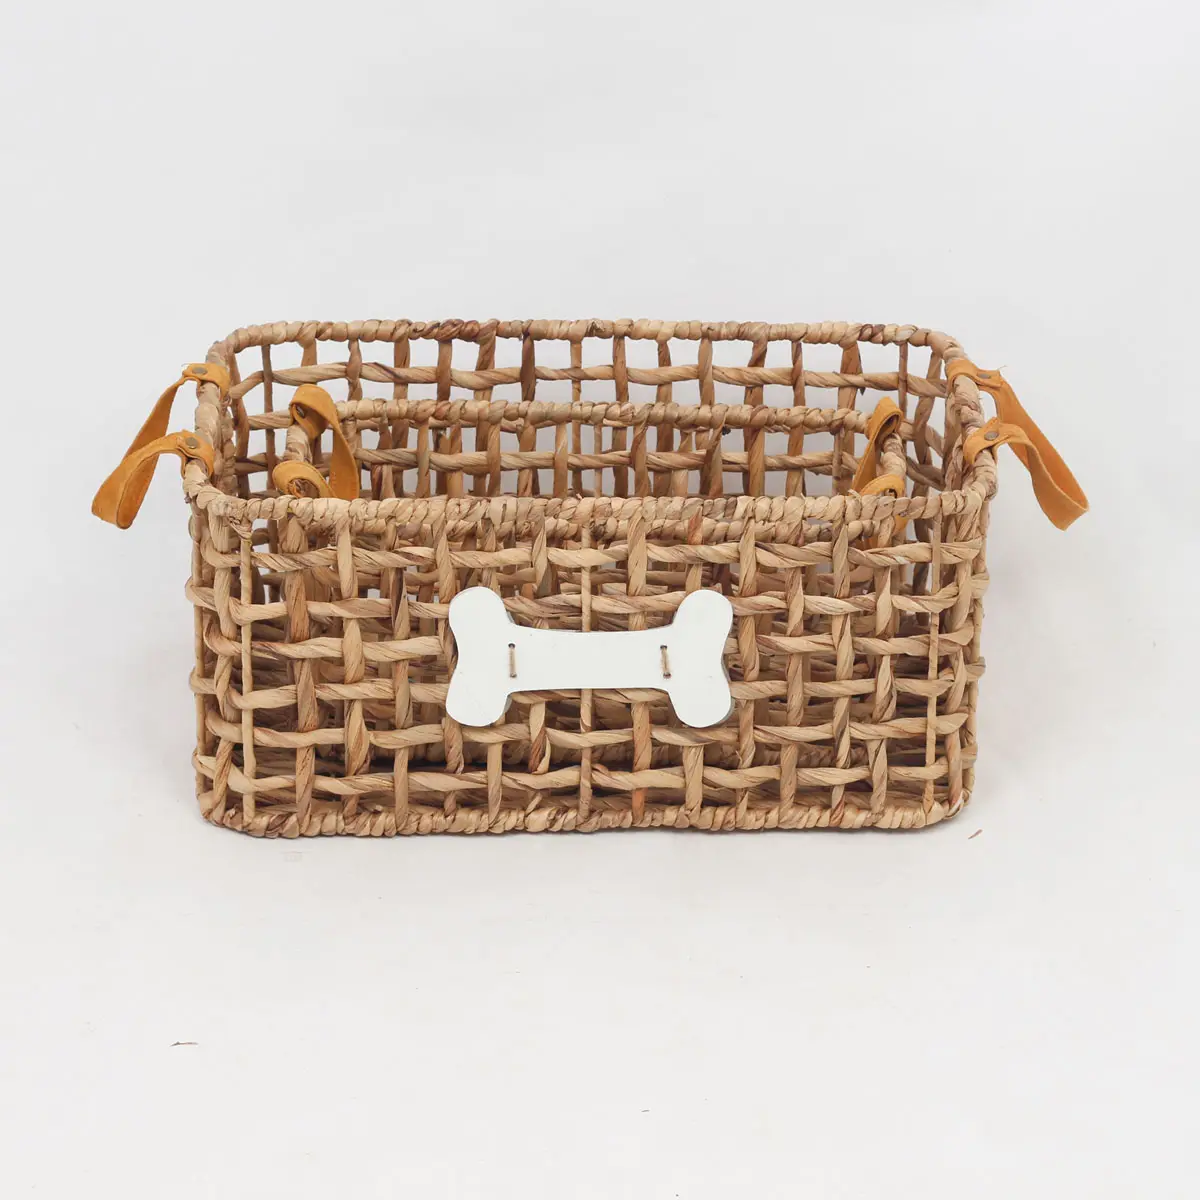 Handicraft Craftsmen High Quality Water Hyacinth Basket Storage Bag For Export Seagrass Cheap Price Hot Selling from Viet Nam